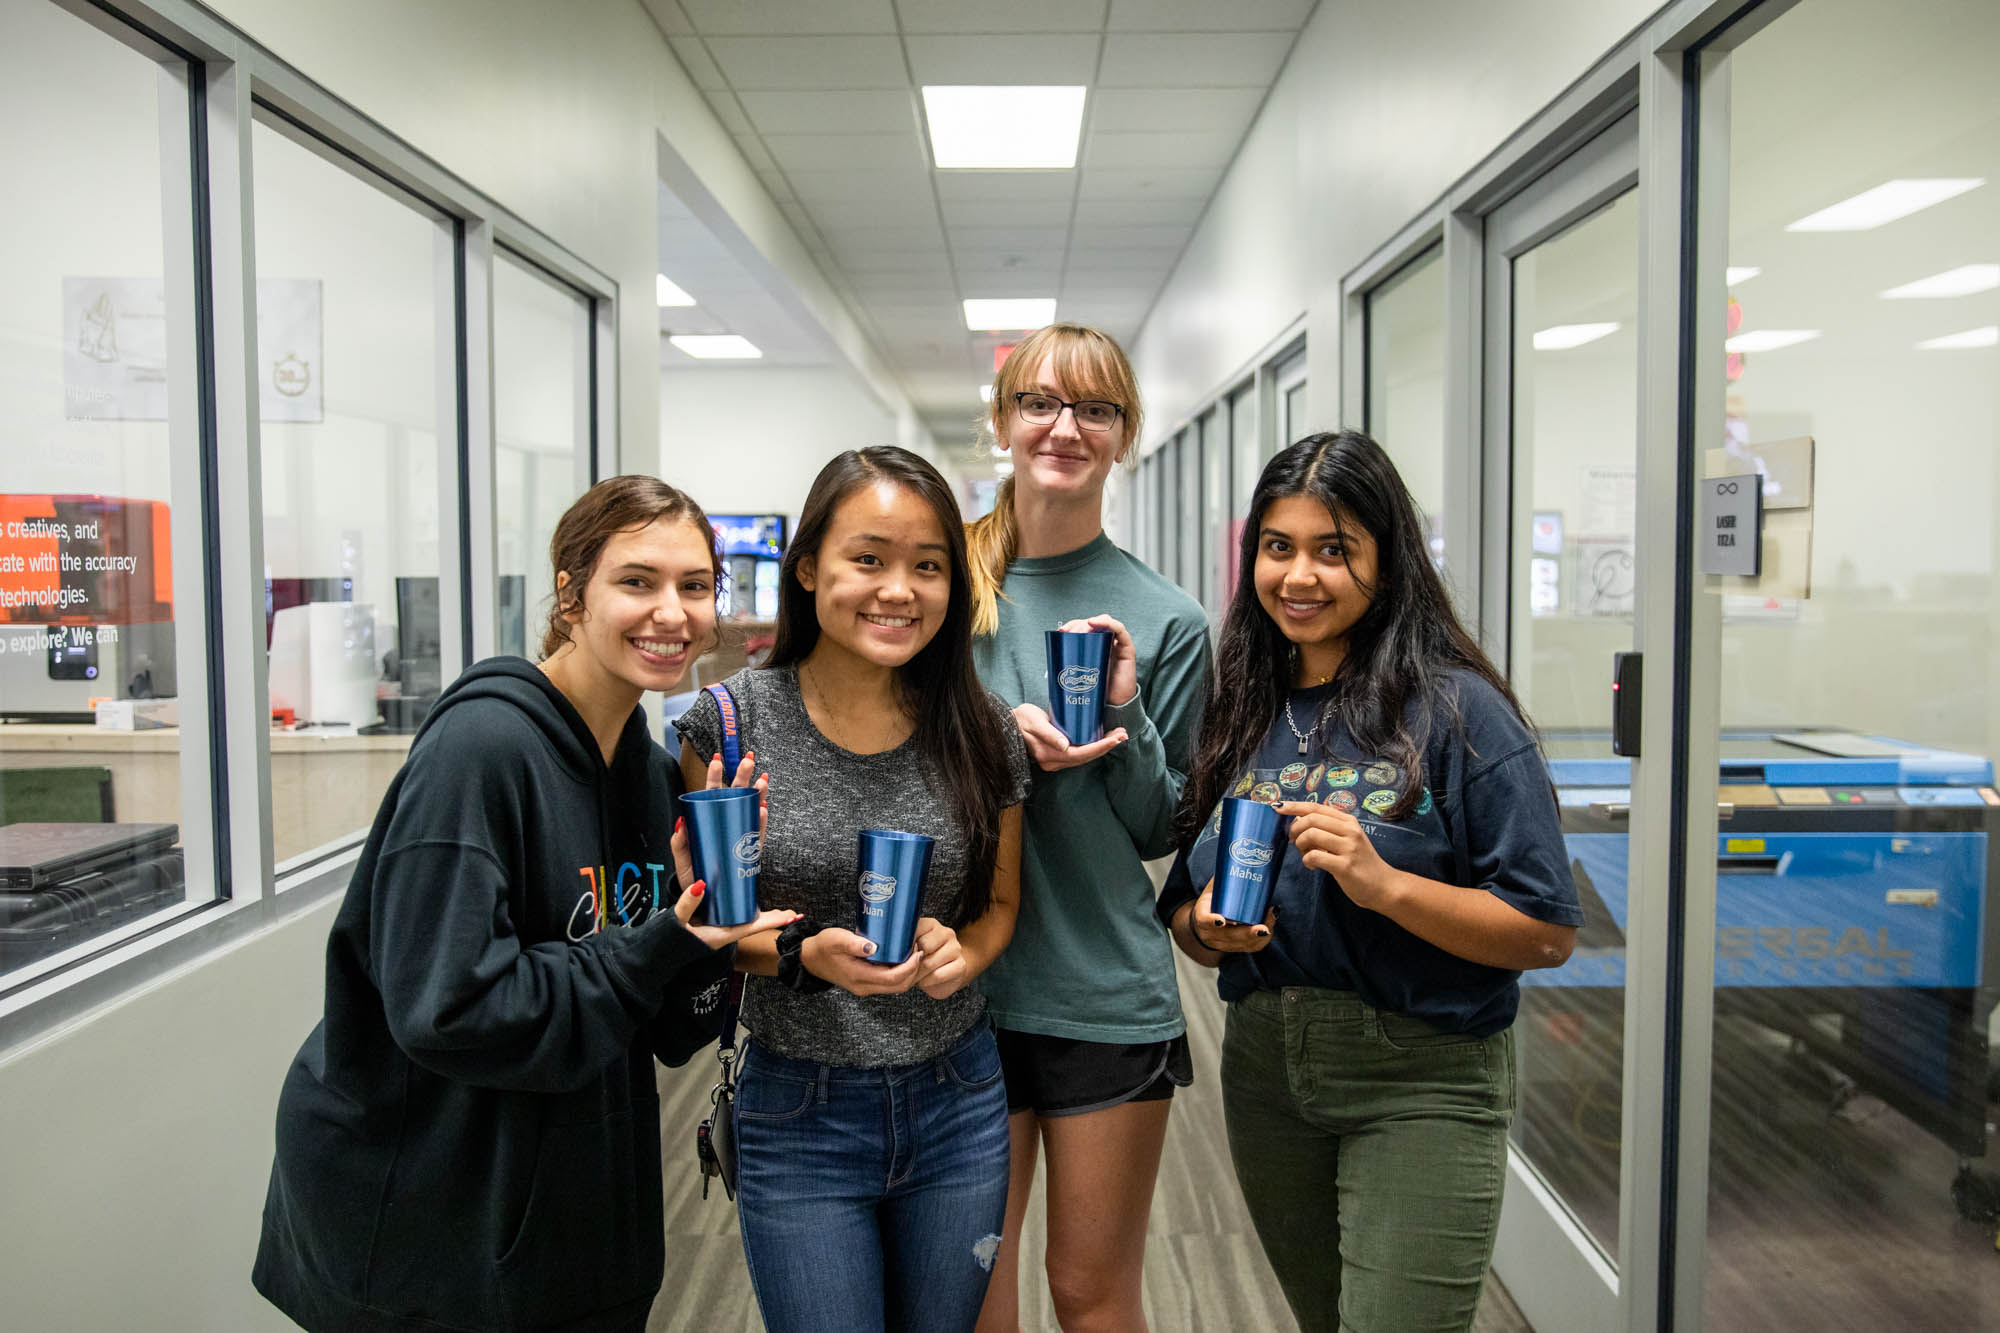 4 students hold up engraved mugs made in infinity hall.